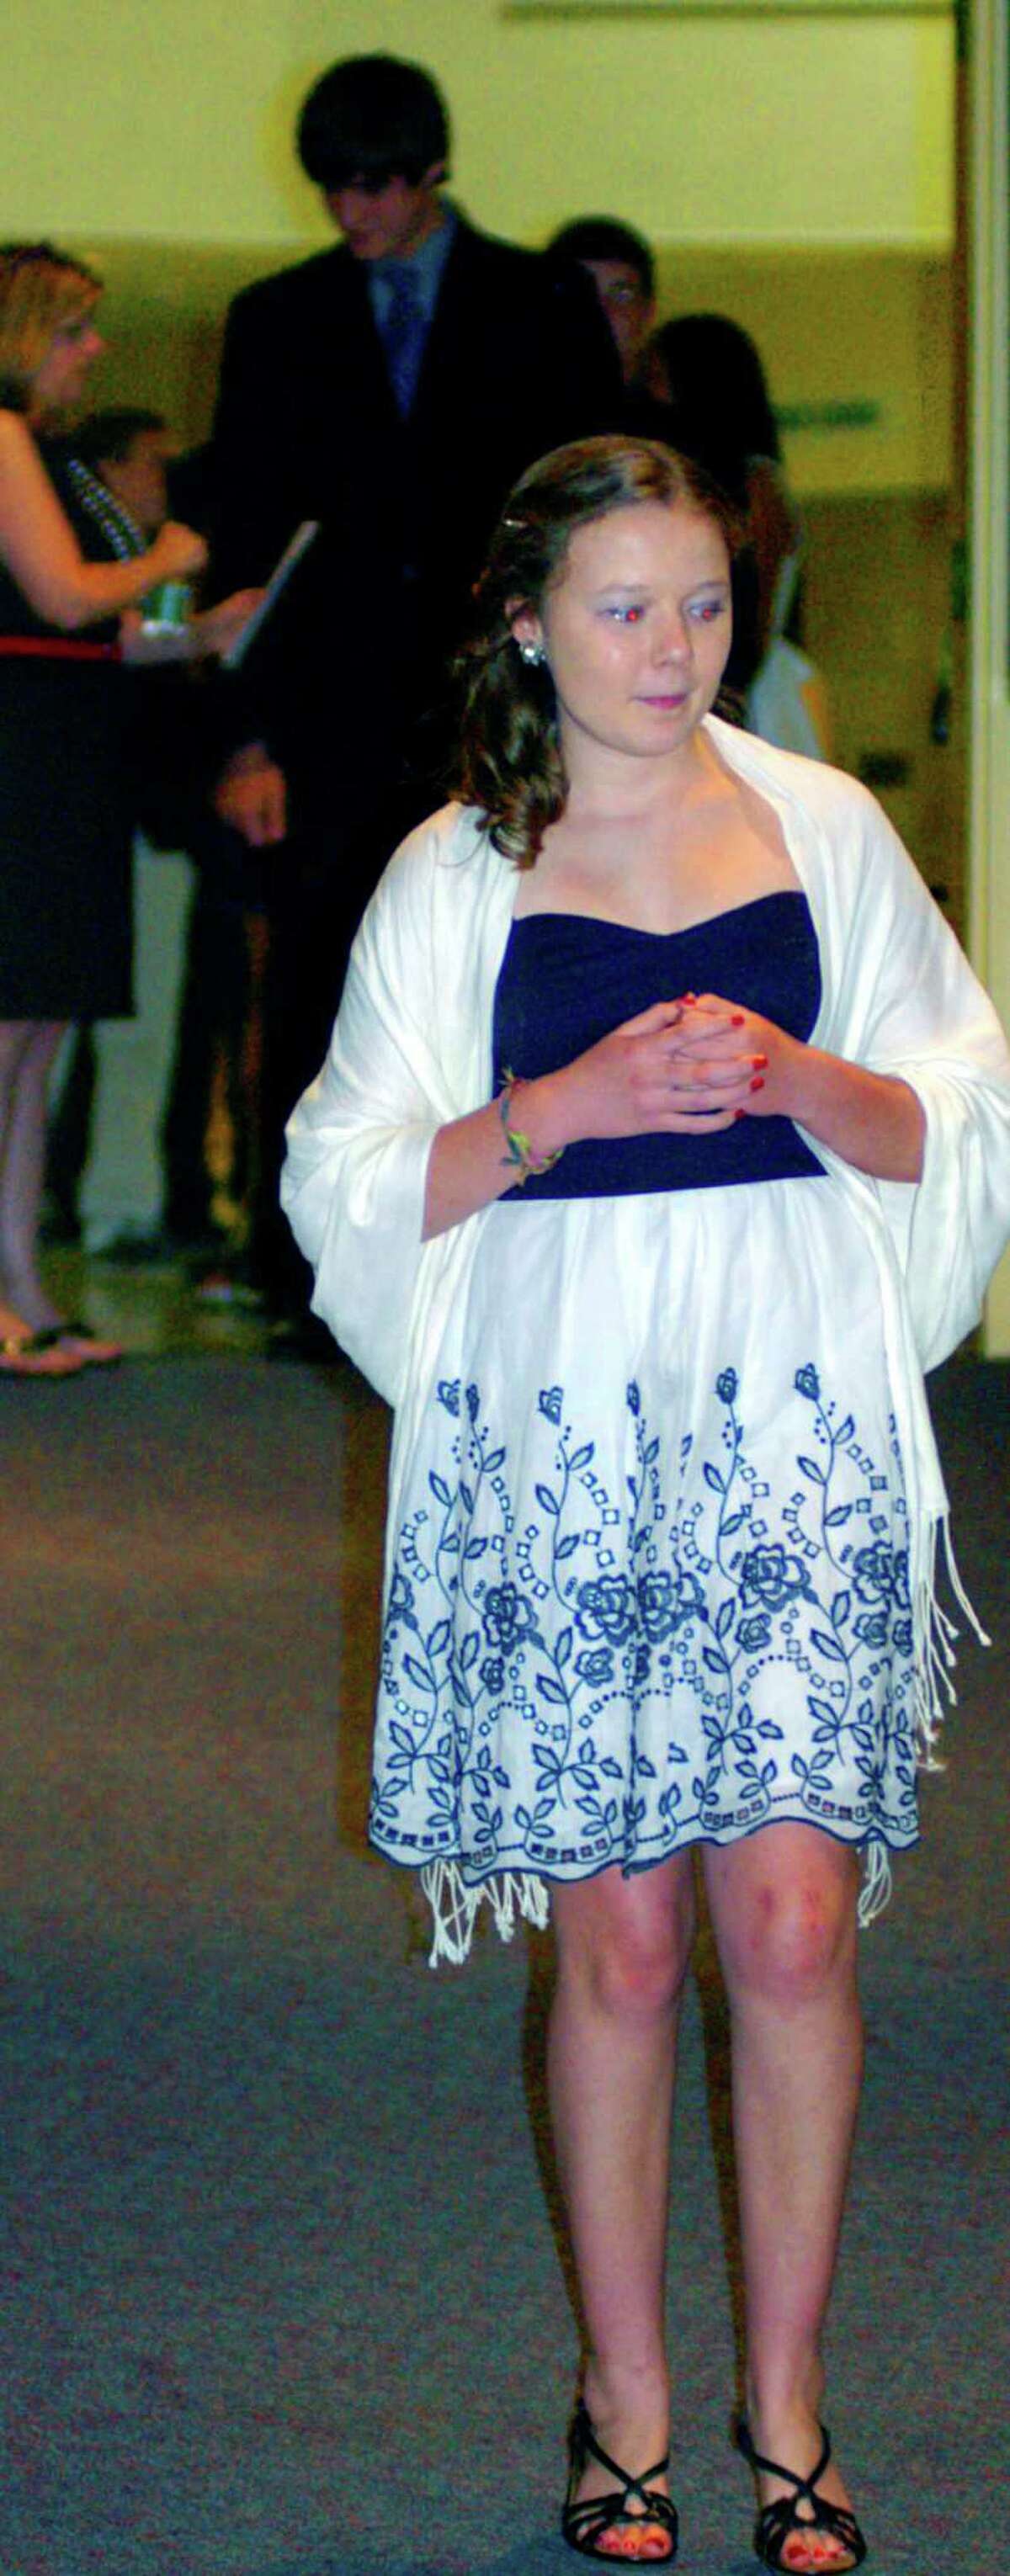 The Shepaug Valley Middle School promotion ceremony, June 15, 2012